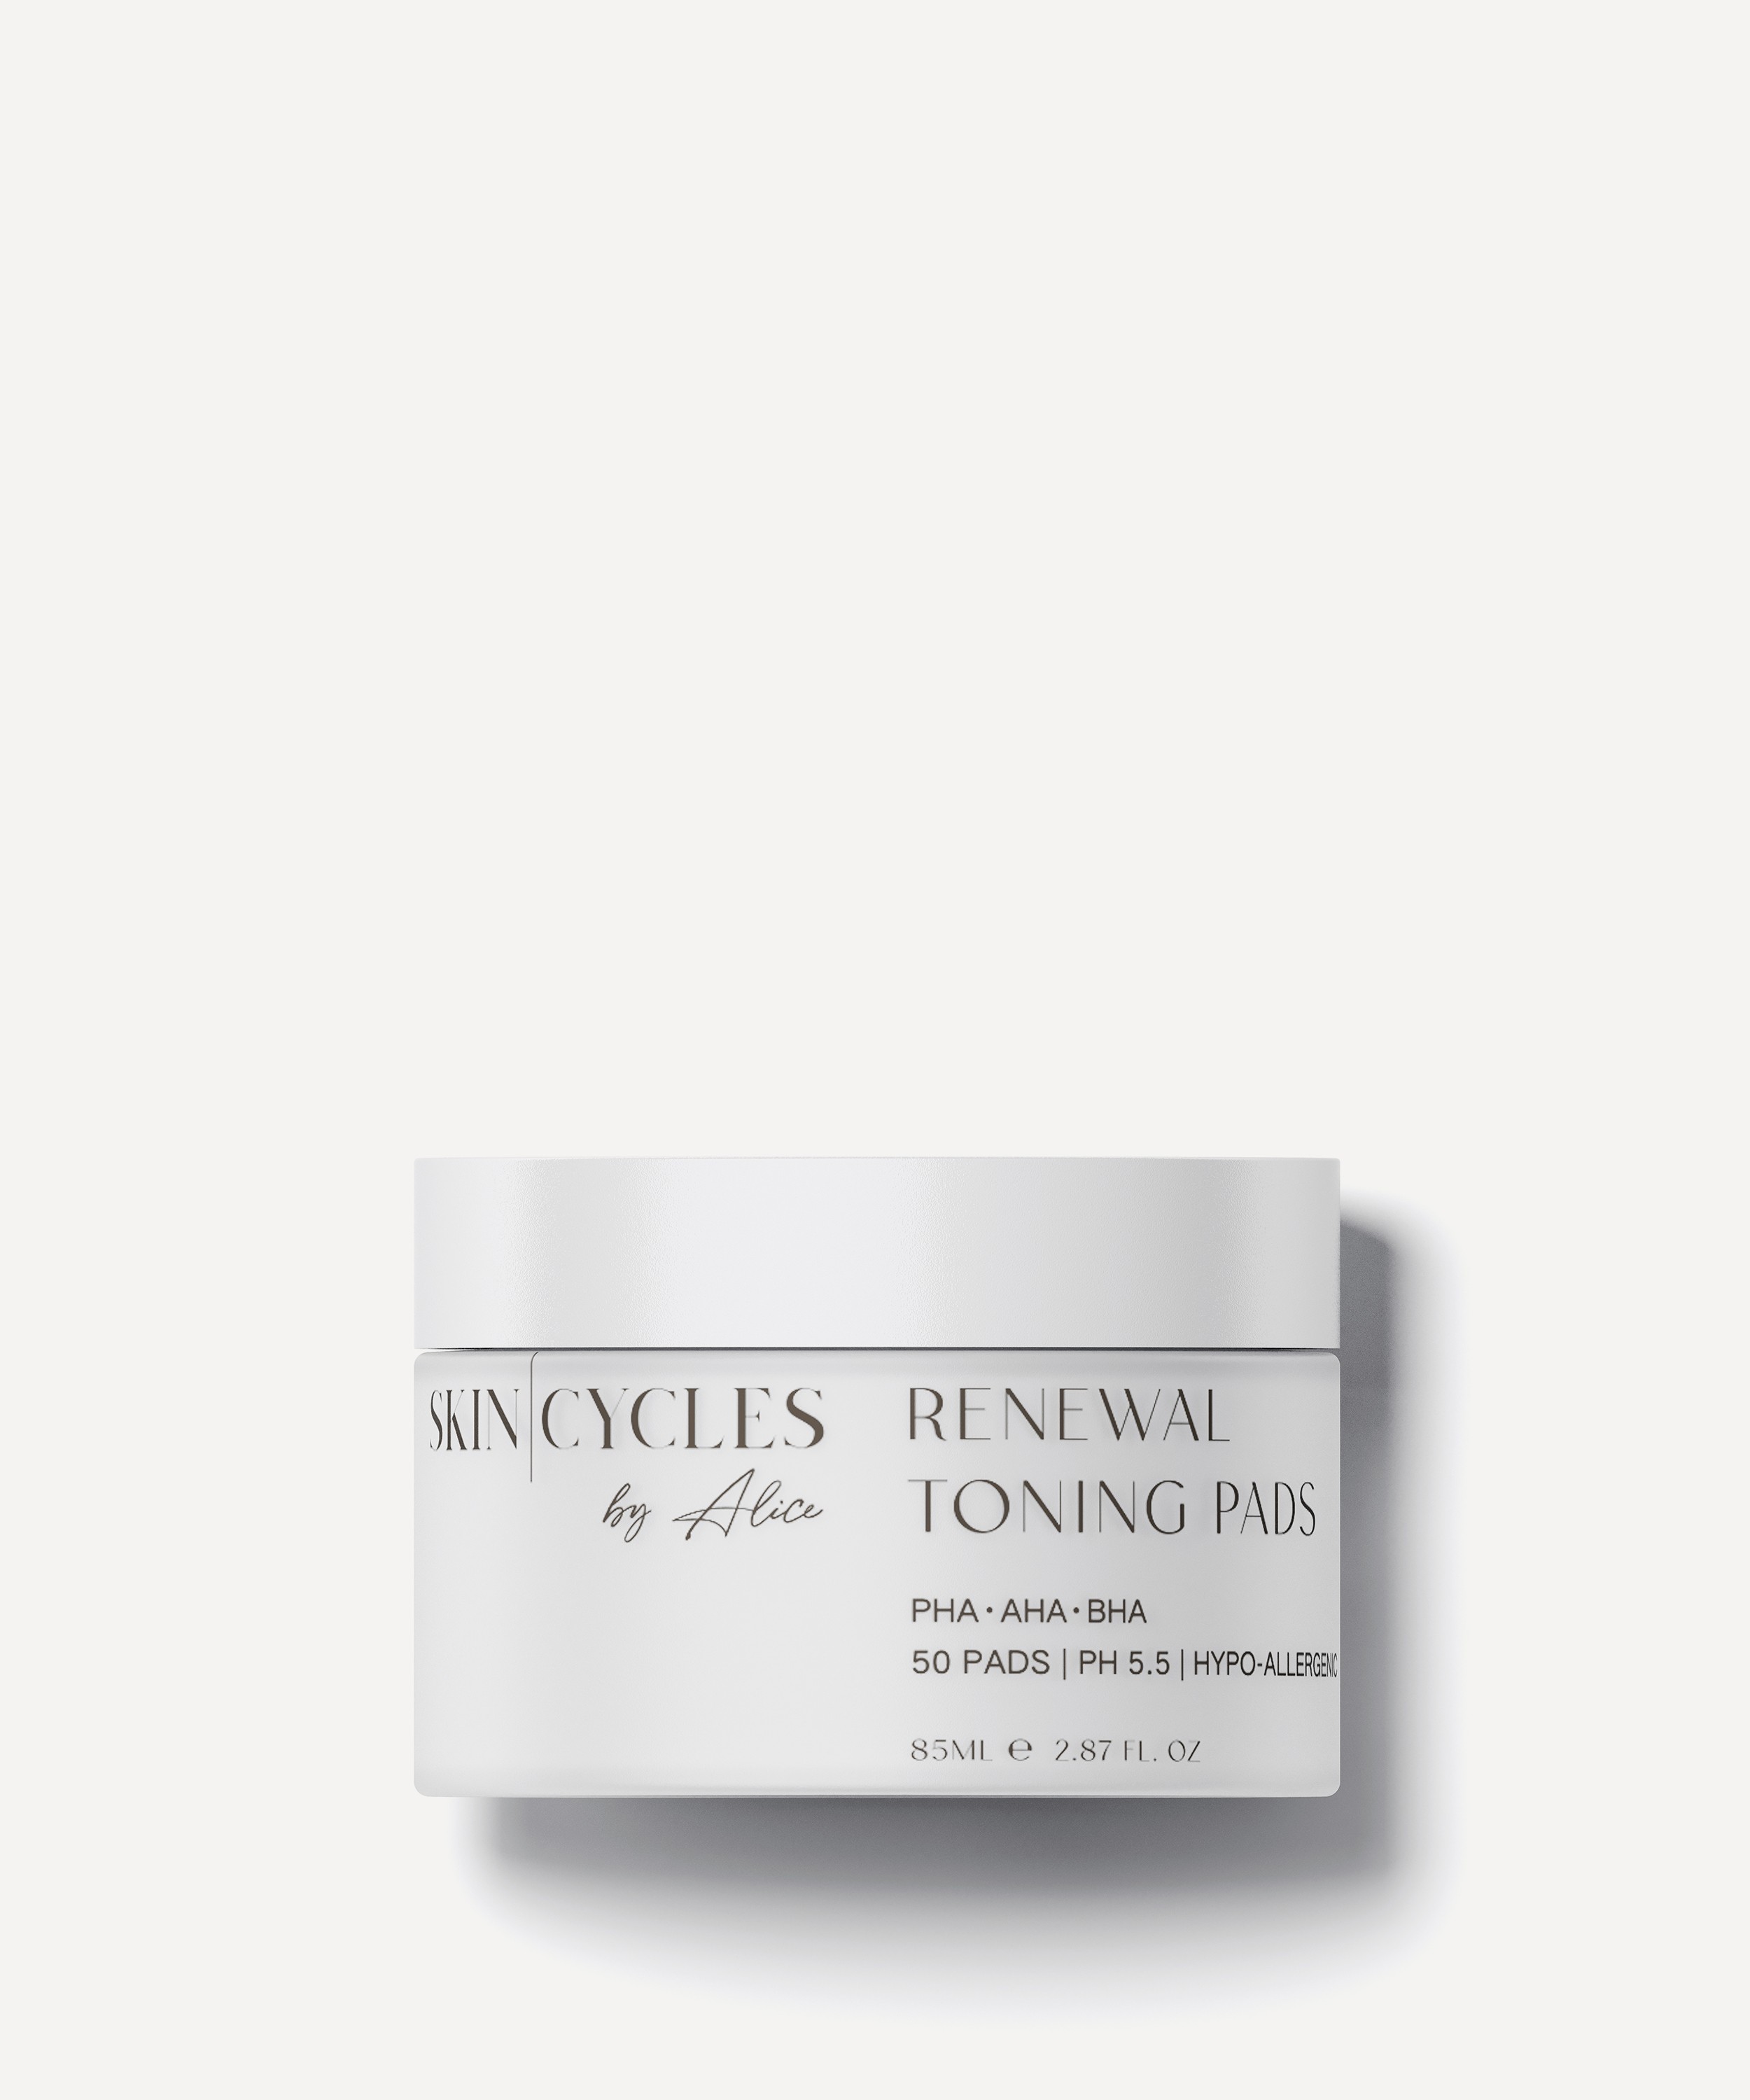 Skincycles - Renewal Toning Pads Pack of 50